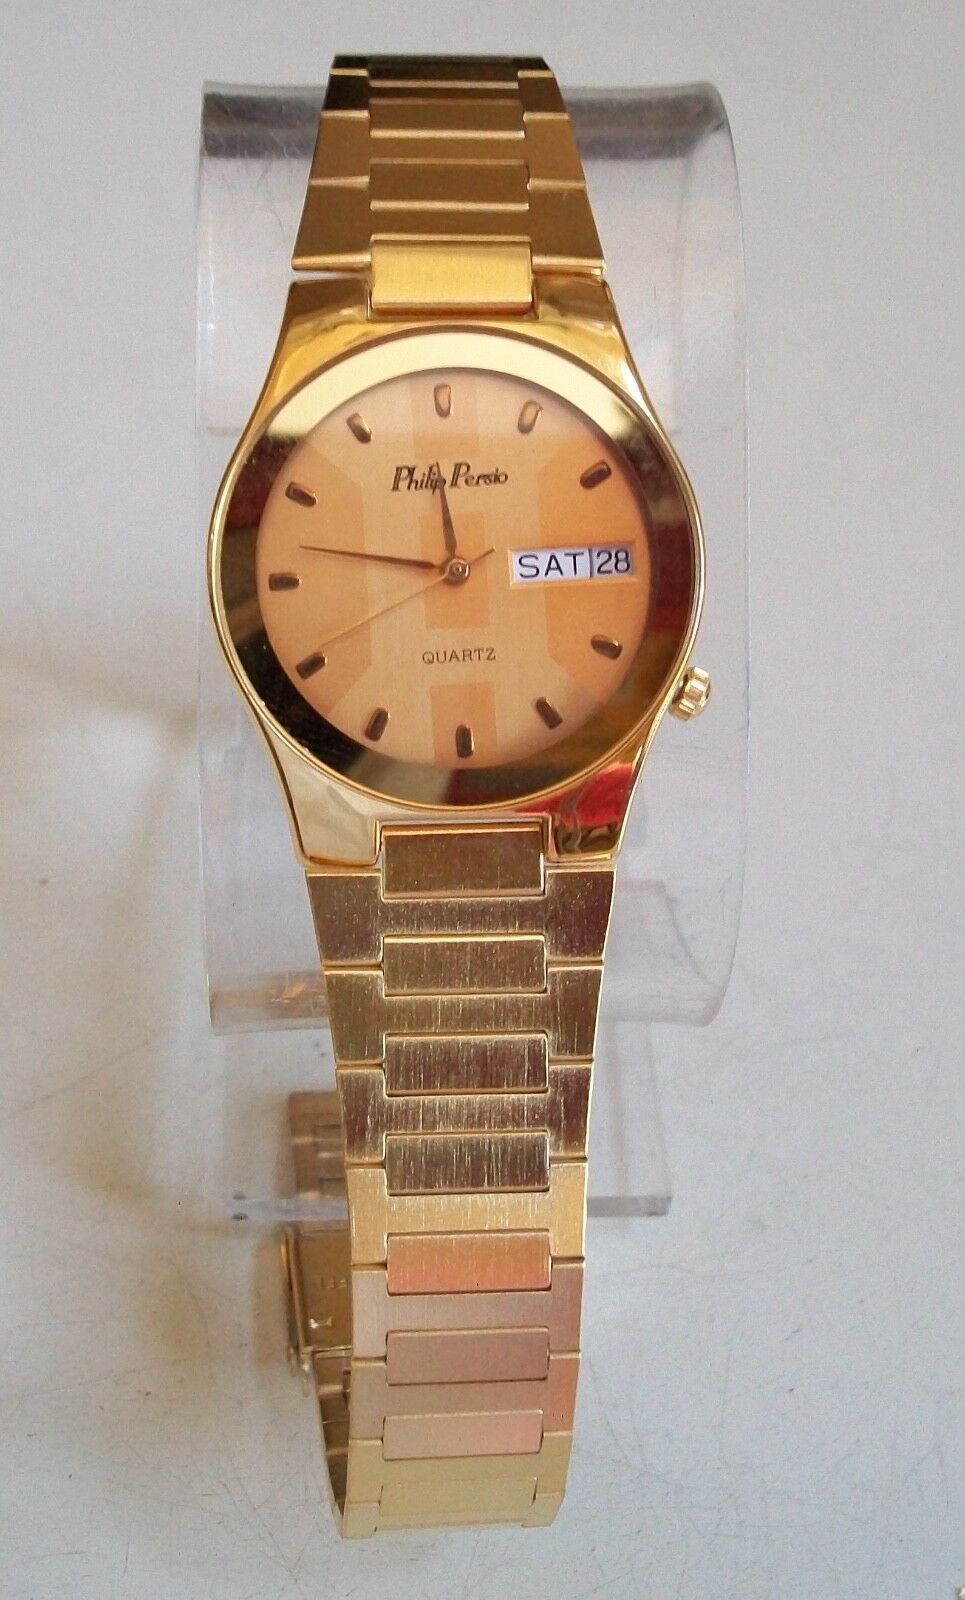 Men's gold finish day and date dressy/casual fashion wrist watch